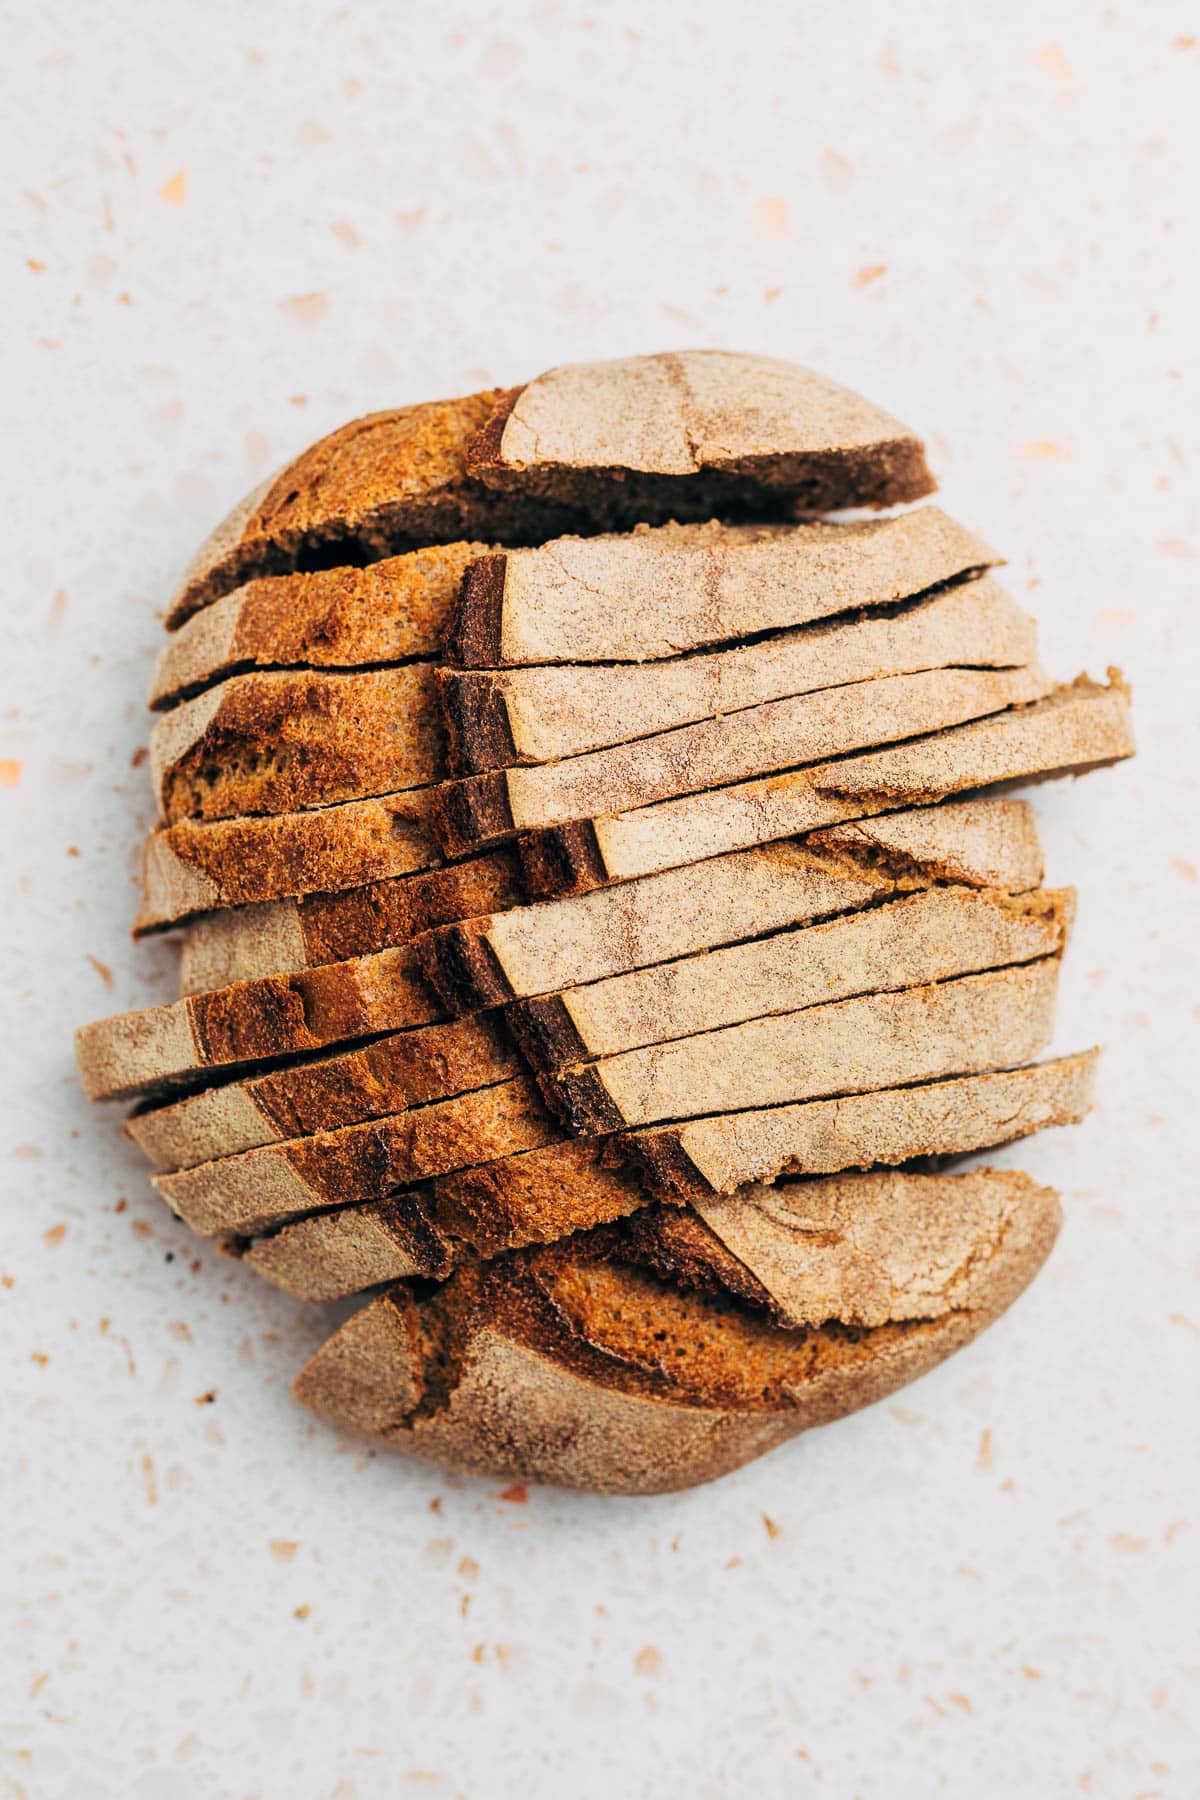 A loaf of whole wheat bread cut into slices, top-down view.